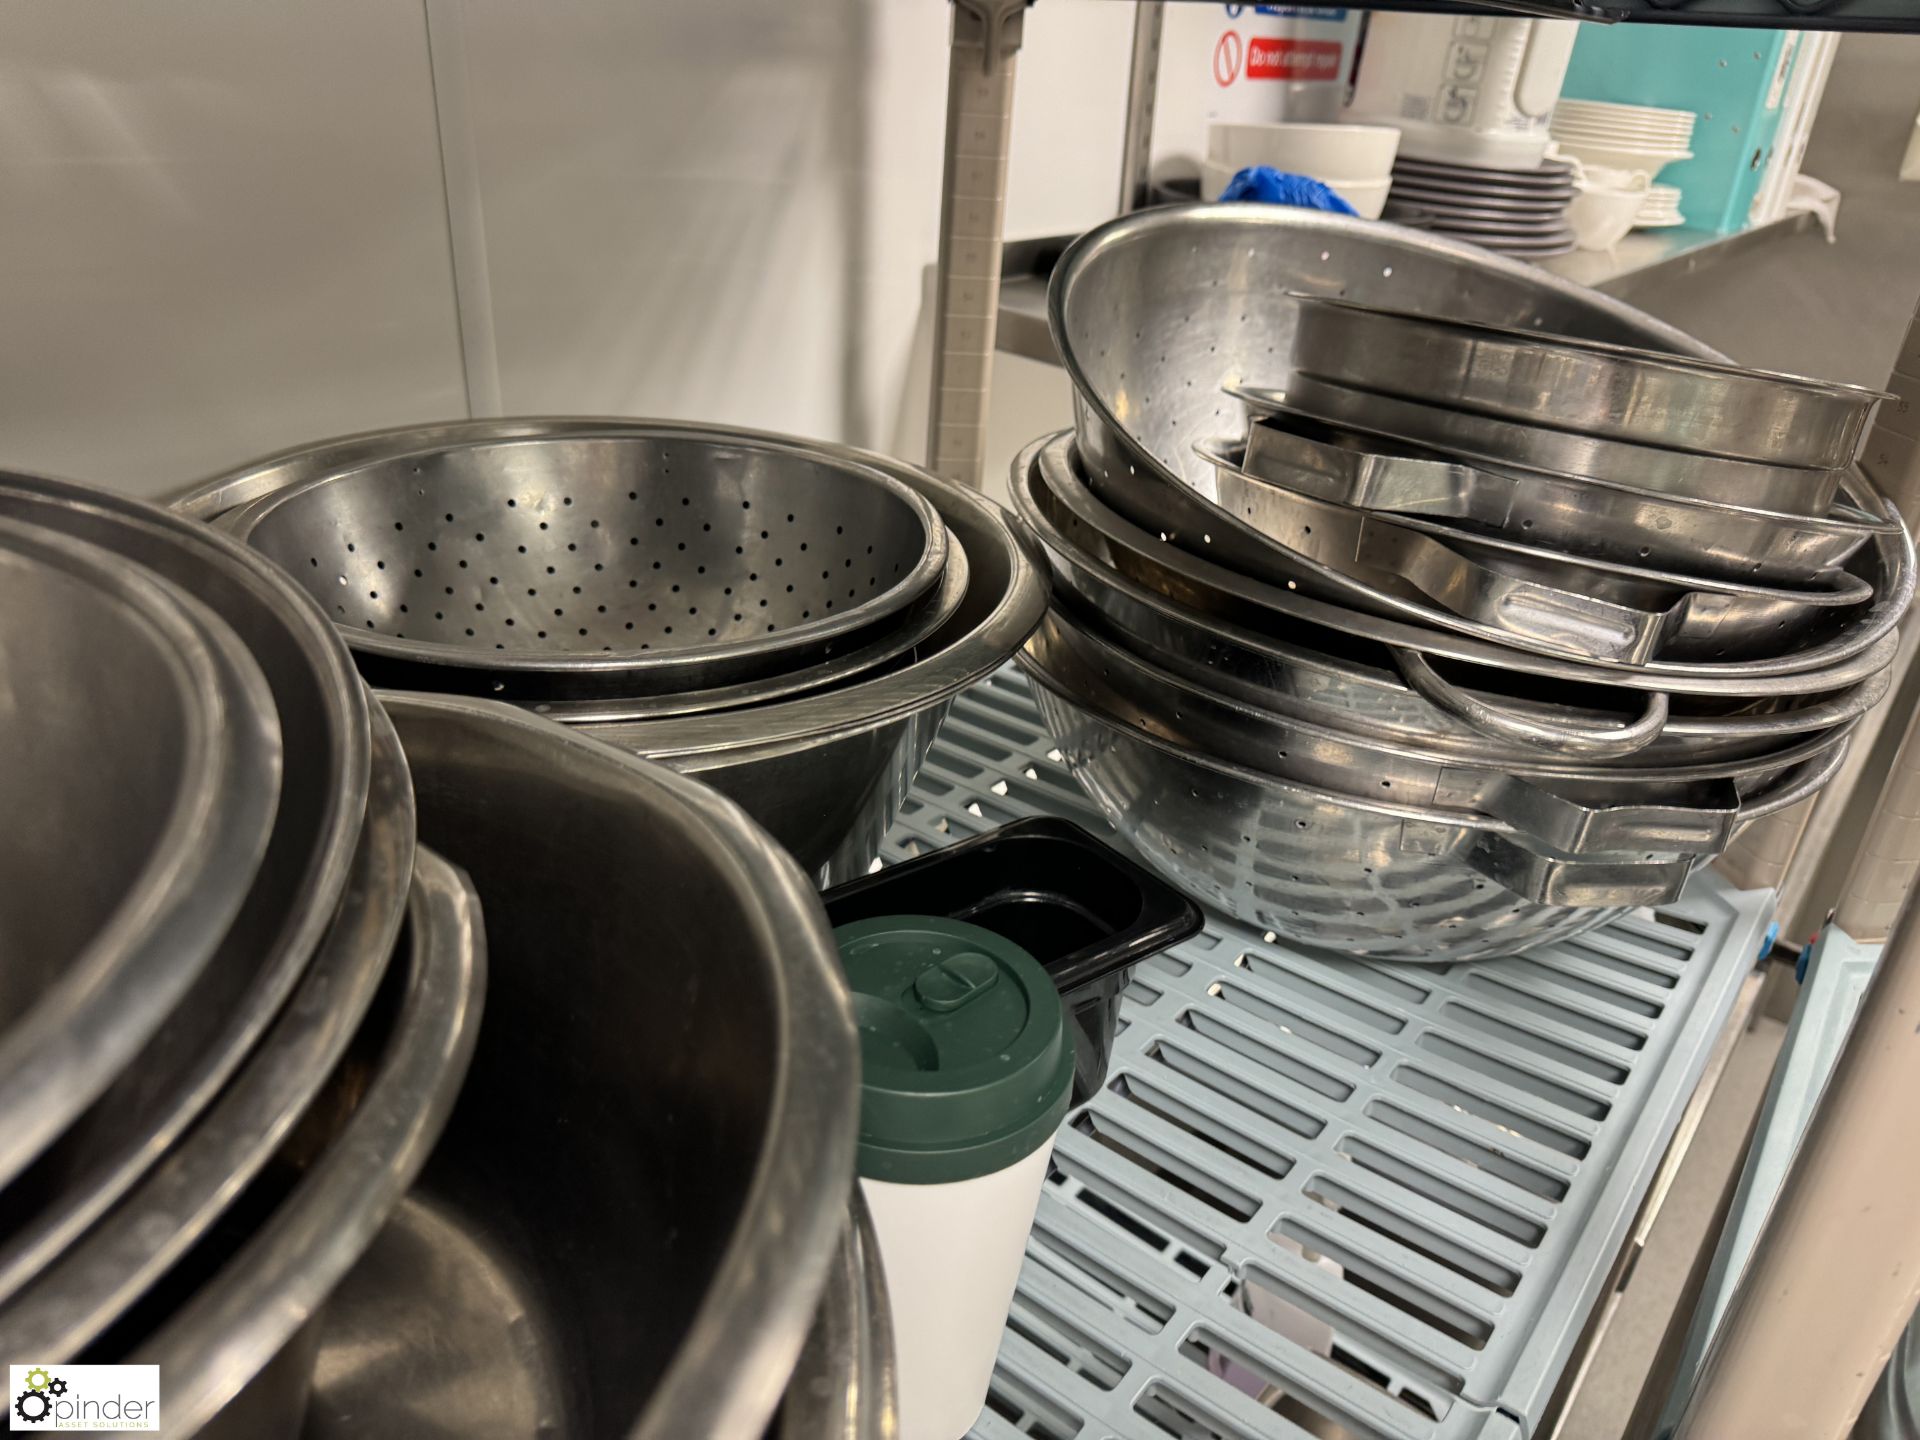 Large quantity stainless steel Cooking Pots, Bowls, Collanders, etc, to rack (rack not included) ( - Image 2 of 6